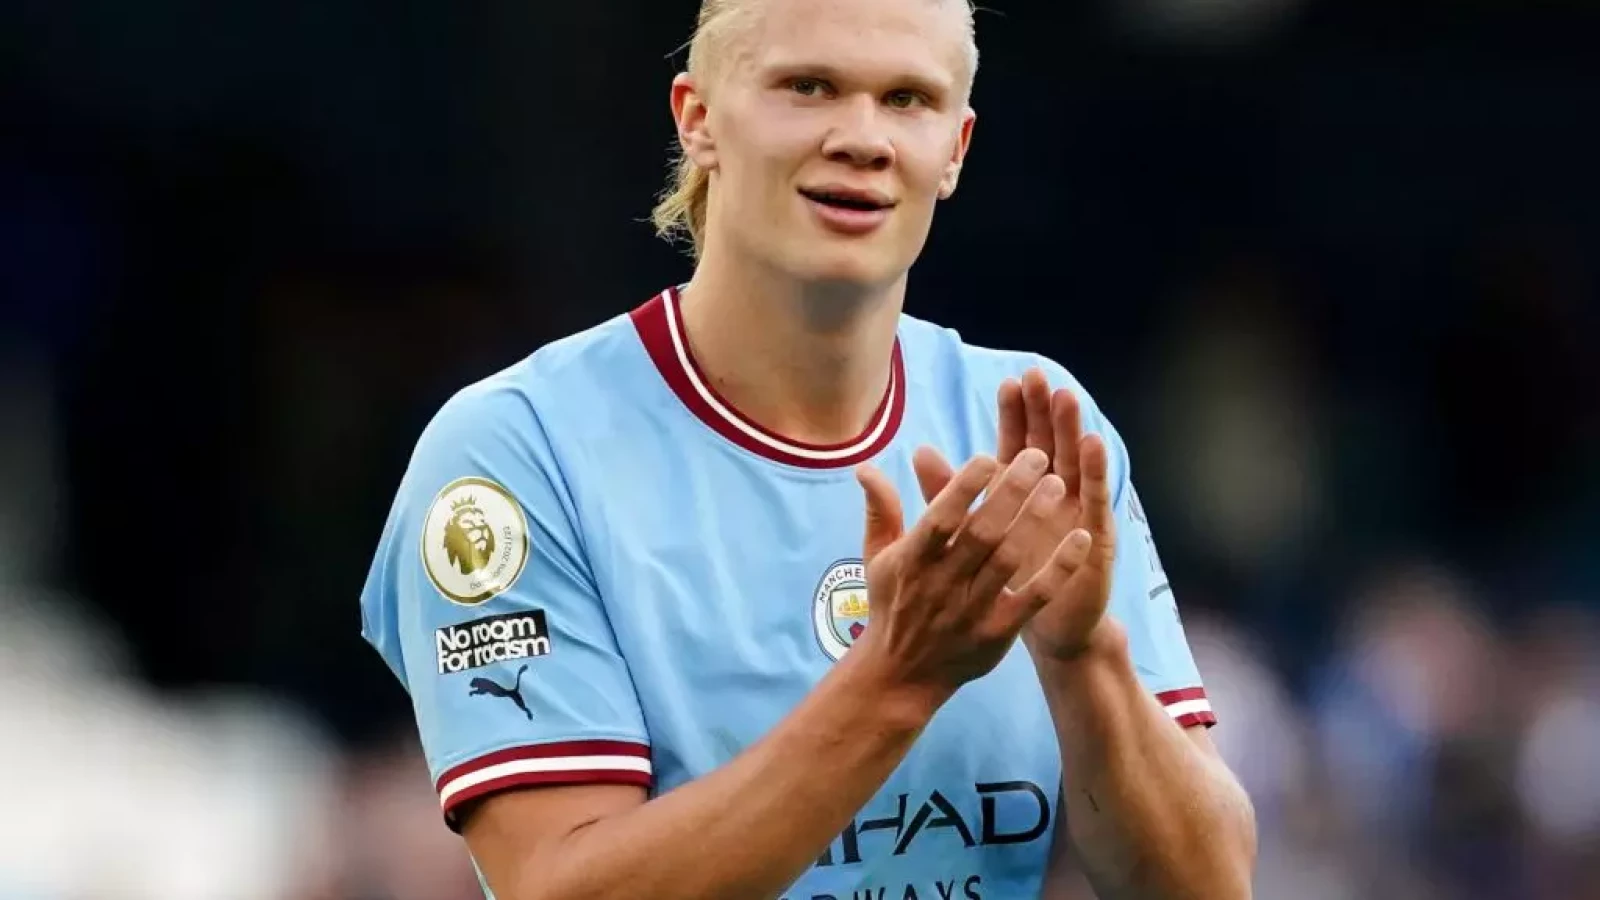 Erling Haaland's desire to reach new heights impresses Pep Guardiola ...